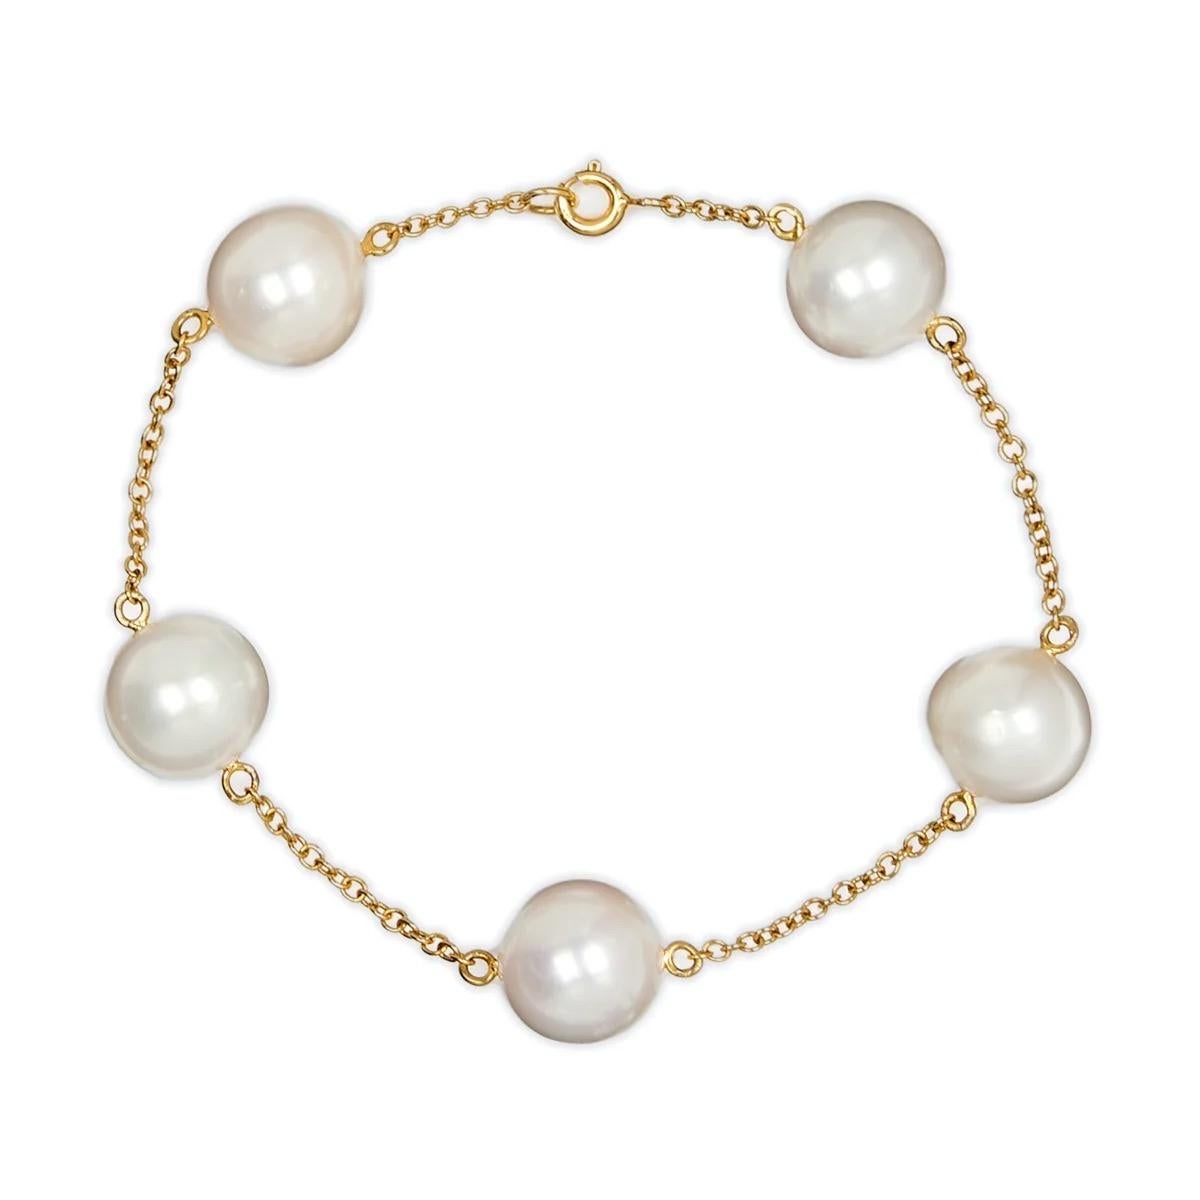 White South Sea Pearl 18K Yellow Gold Chain Bracelet by Water Jewels. Handmade with an 18K Yellow Gold chain strung with 5 White round South Sea Pearls. Each Pearl has been selected  for its luster, shape and colour. All 5 Pearls are an excellent